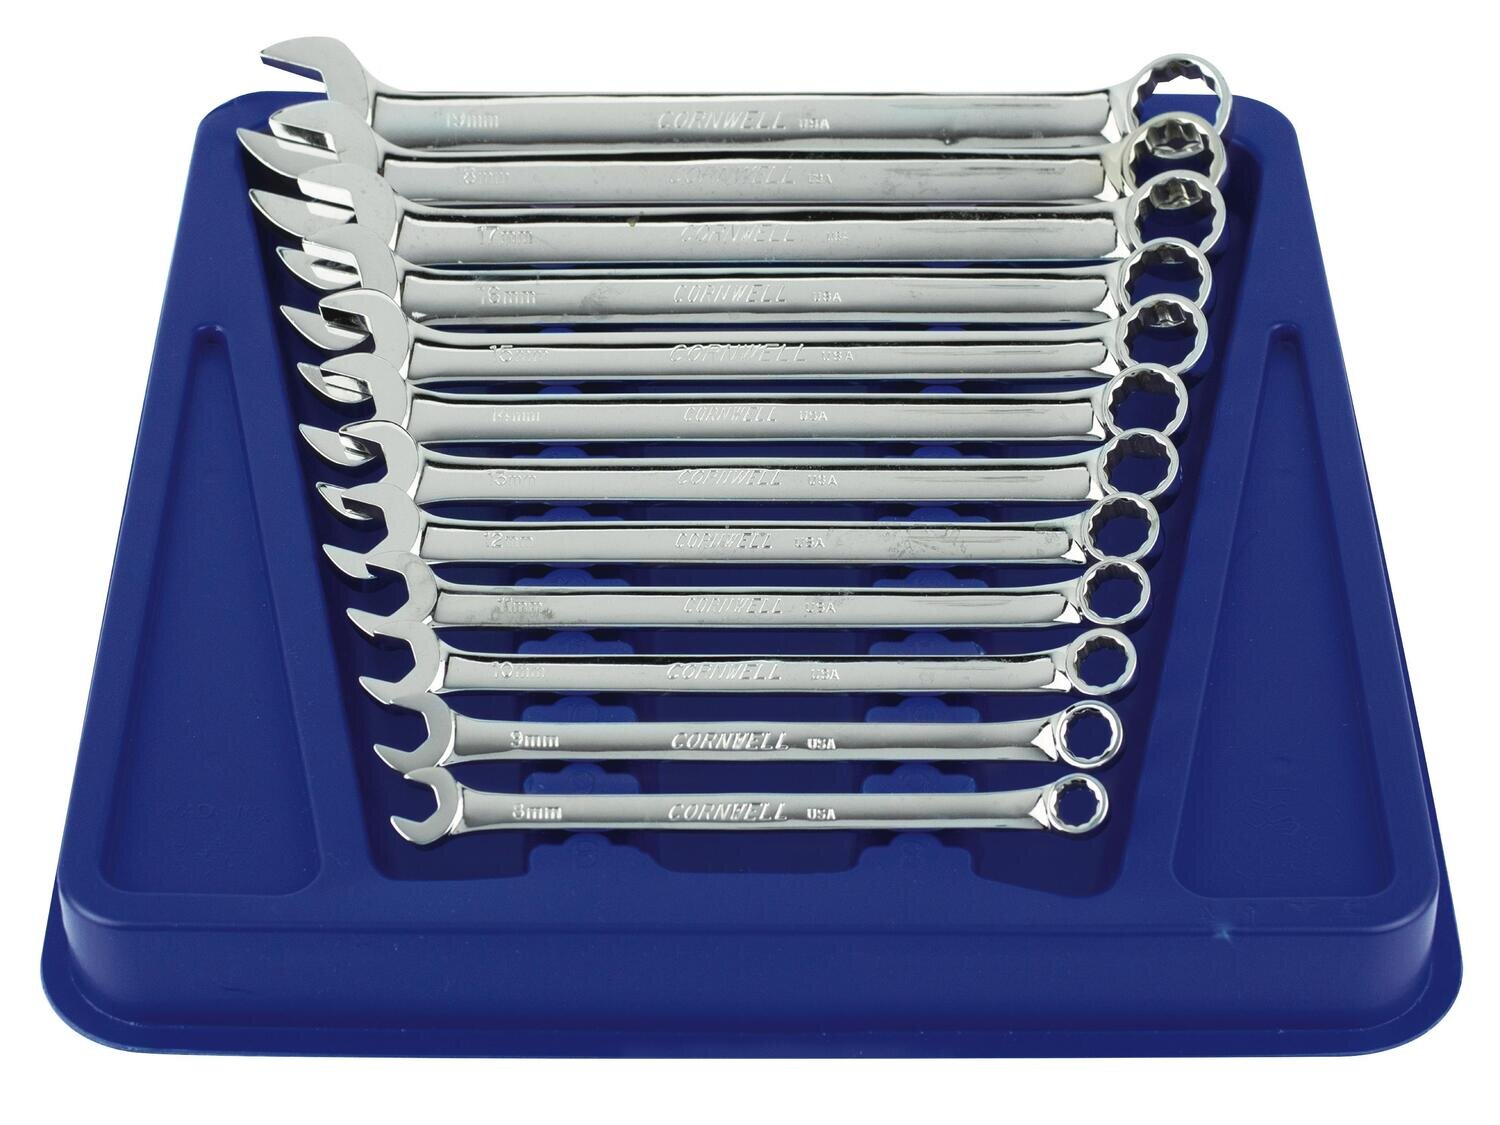 WCM112STSS - 12 Piece Metric Combination Wrench Set, 12 Point